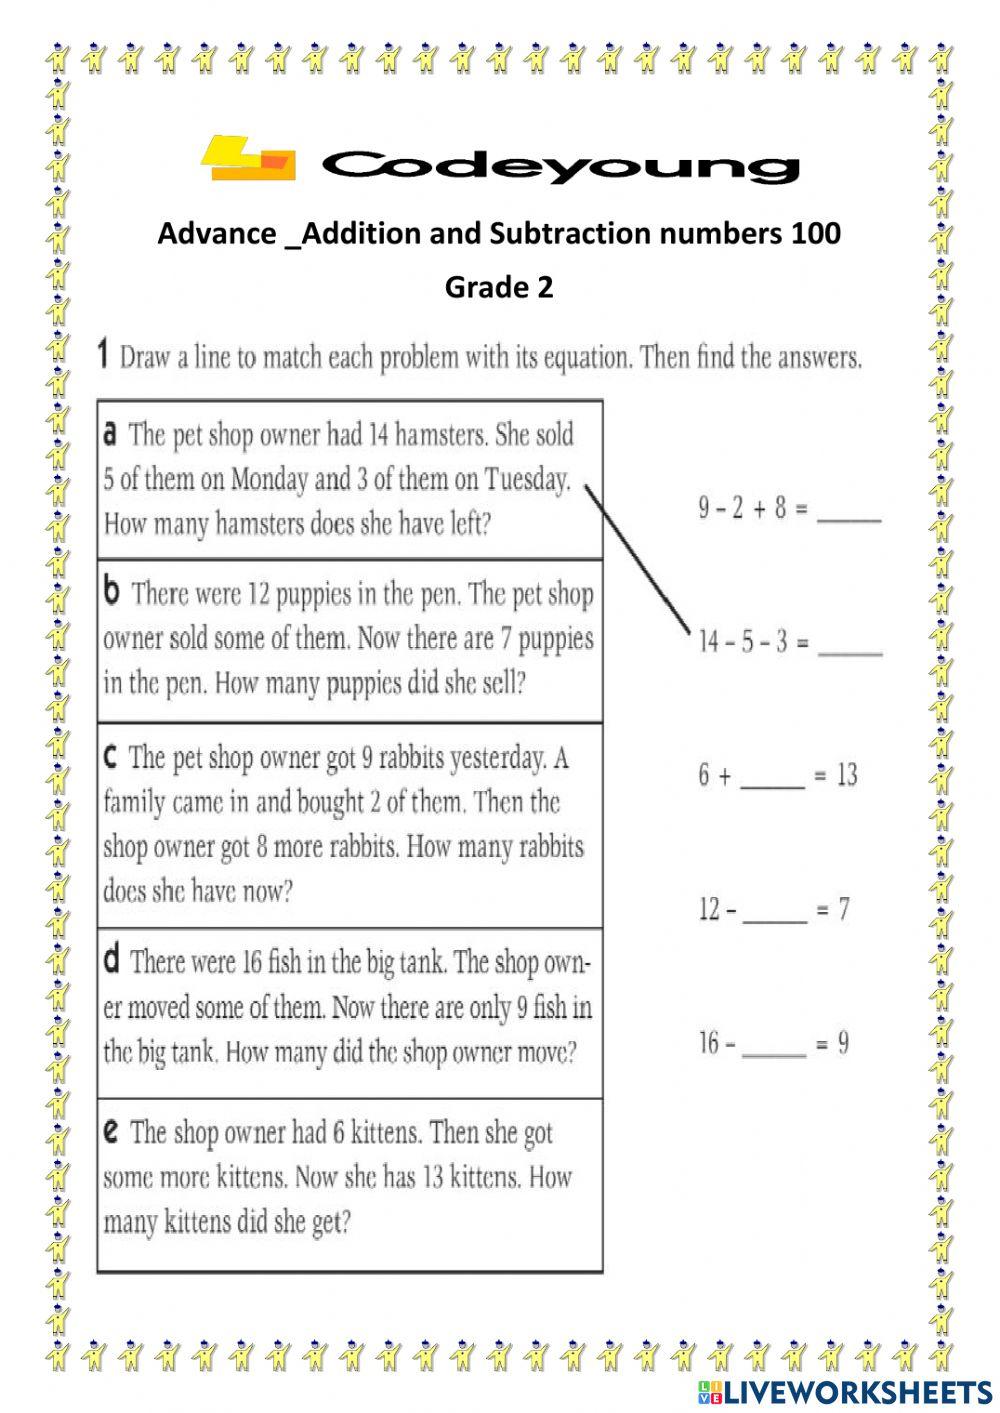 Addition and Subtraction numbers 100